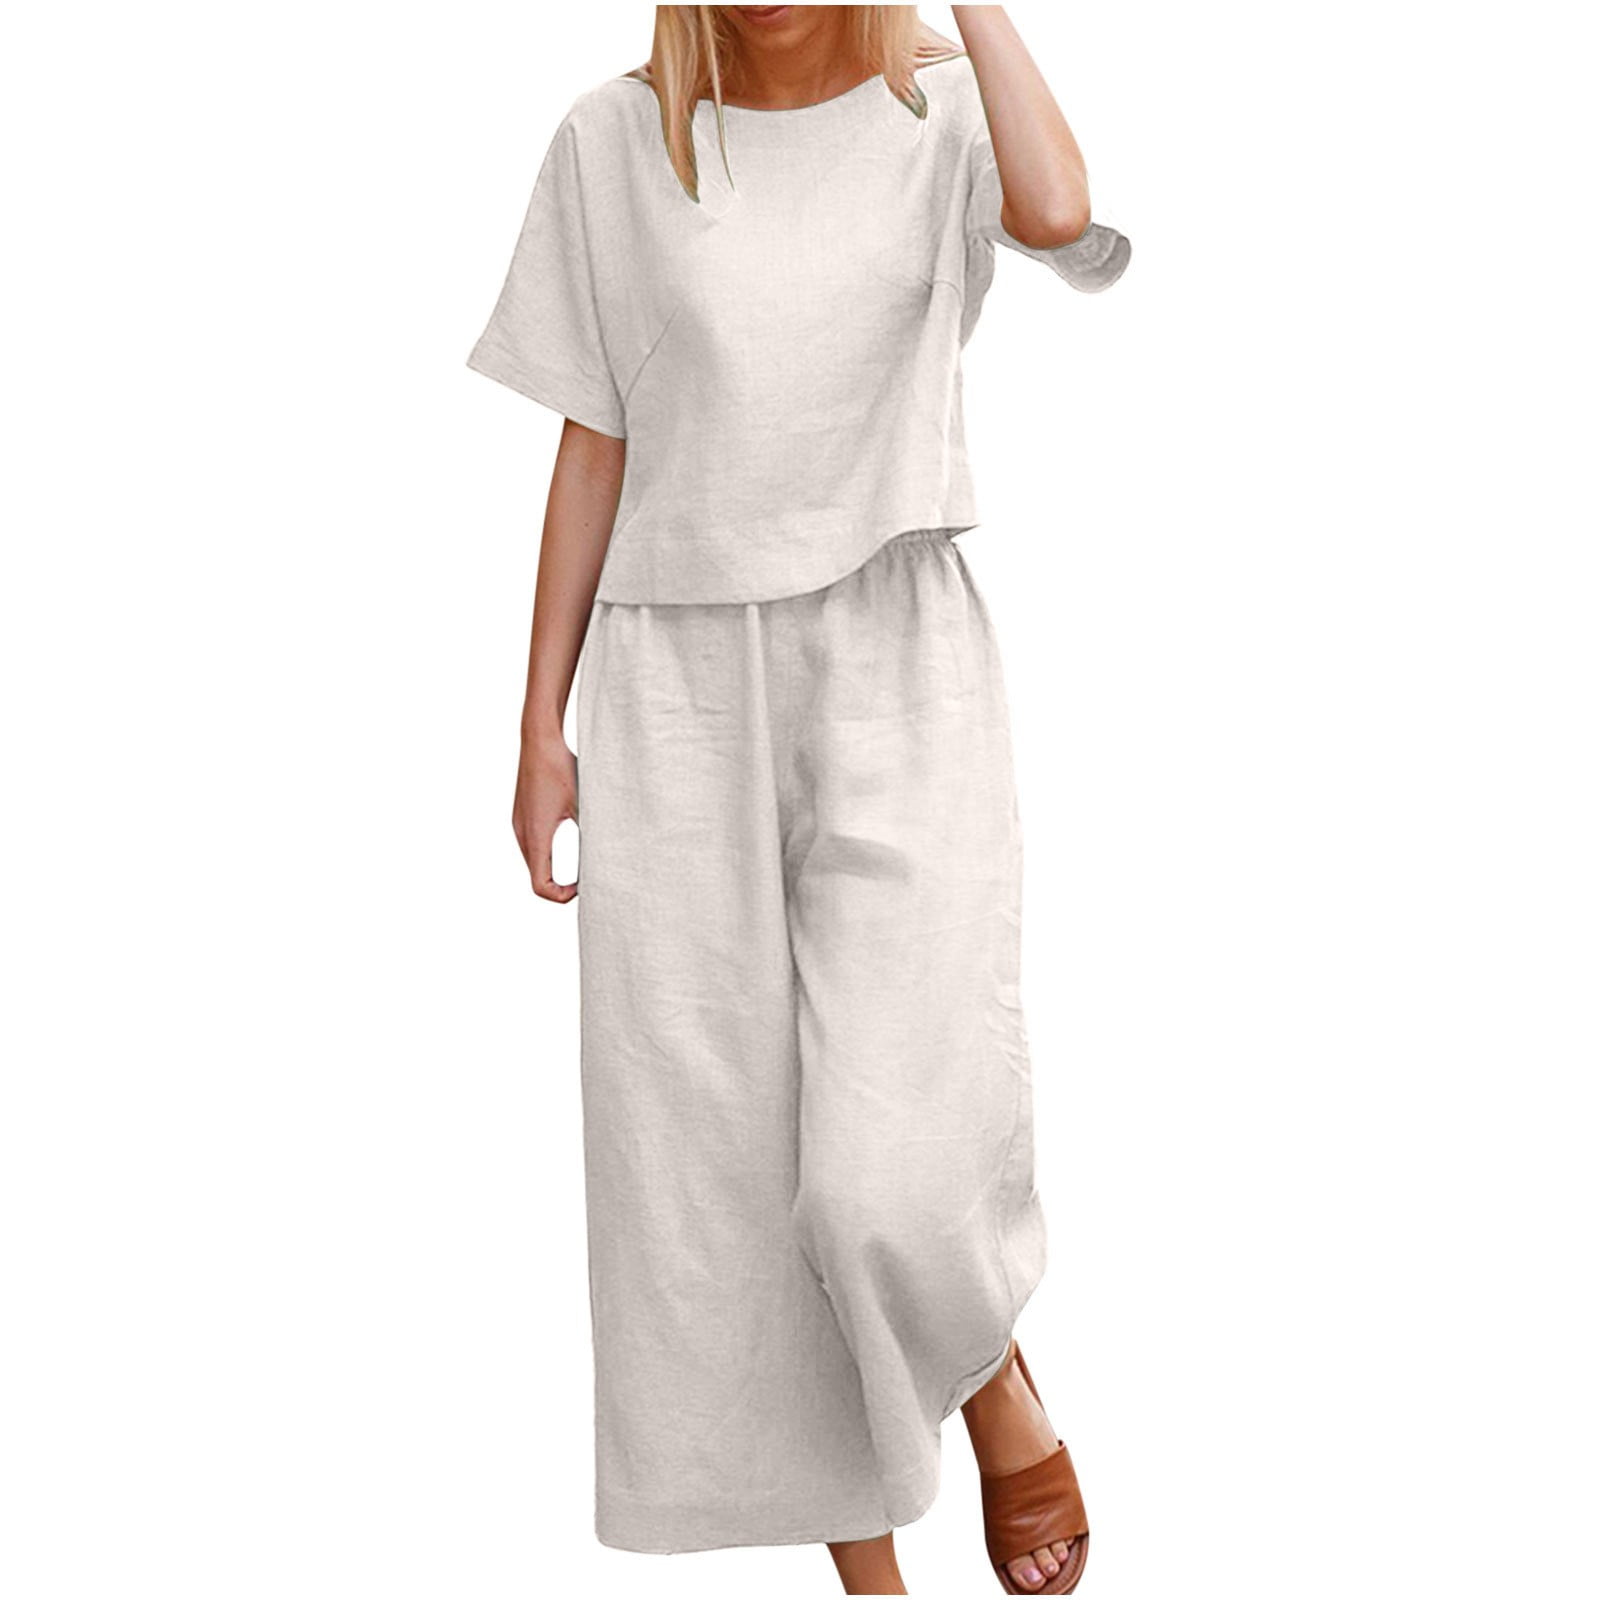 Summer Women Cotton and Linen 2 Pieces Sets Patchwrok Print Tops and Loose  Casual Pants Fashion Female Outfits